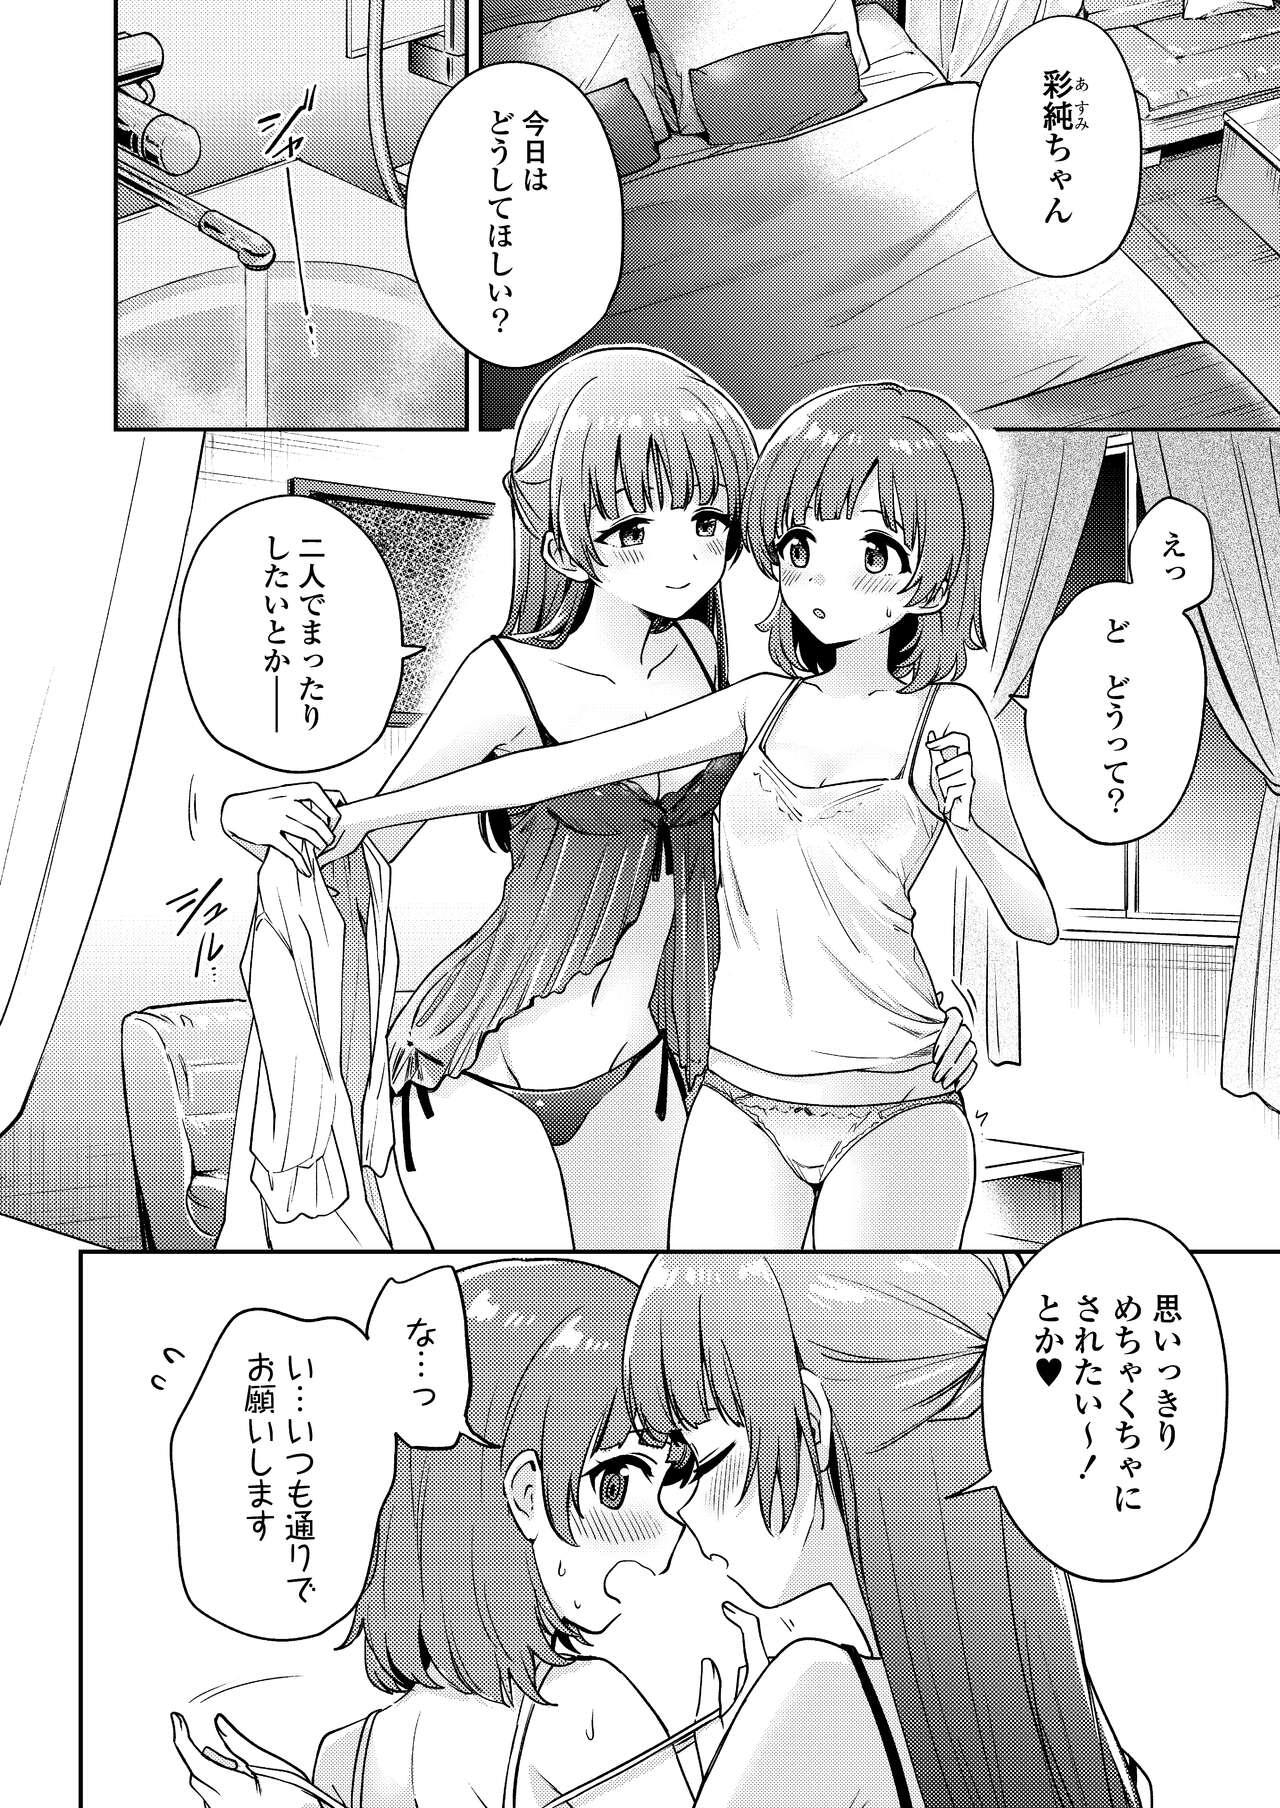 Asumi-chan Is Interested In Lesbian Brothels! 1